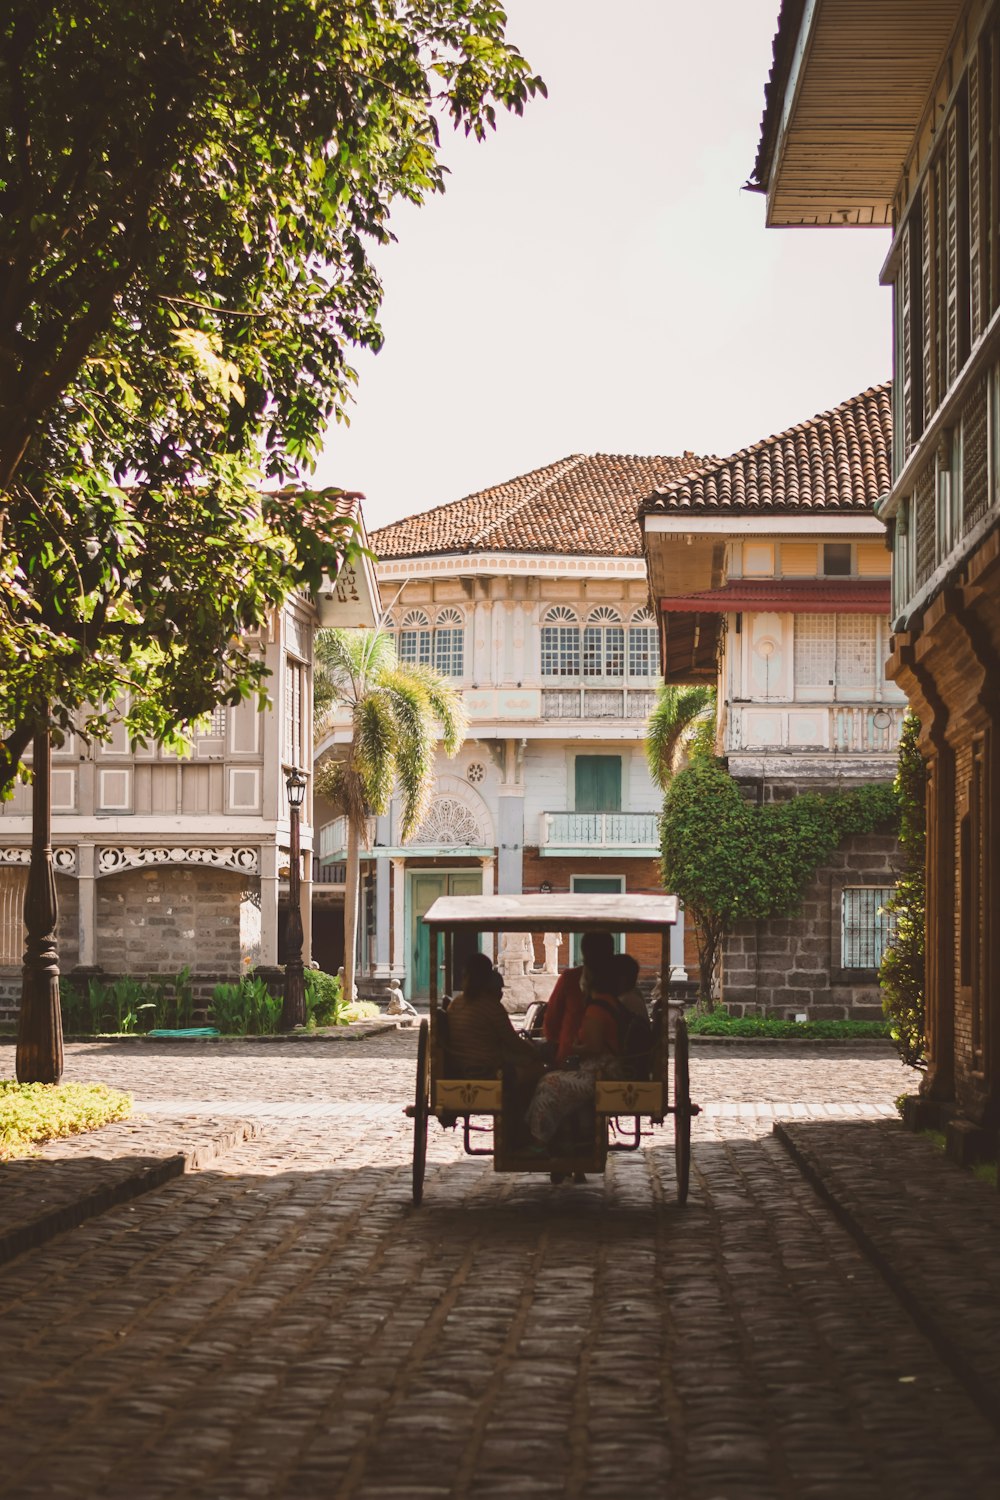 two people sitting in a cart on a cobblestone street